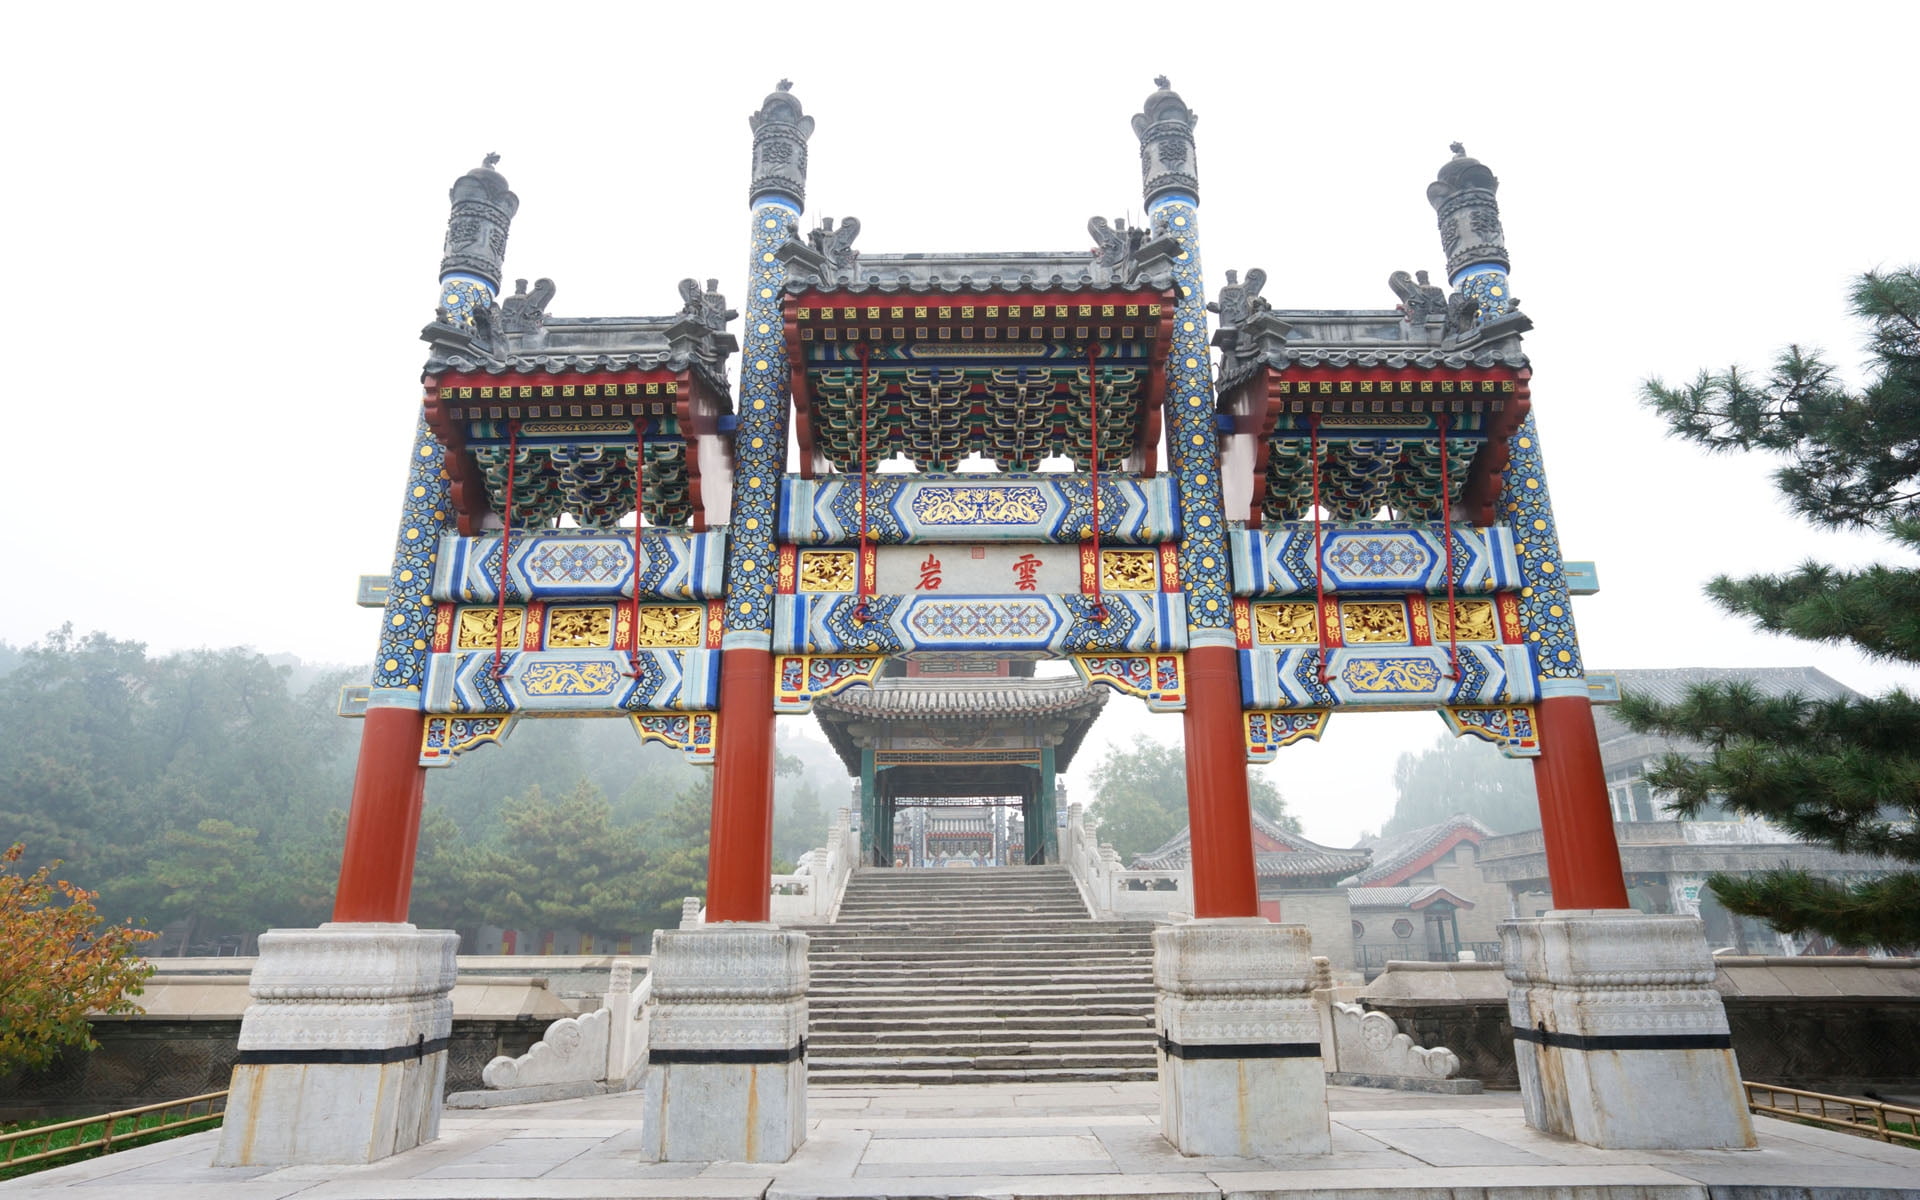 architectural photography of gray and red temple during foggy daytime